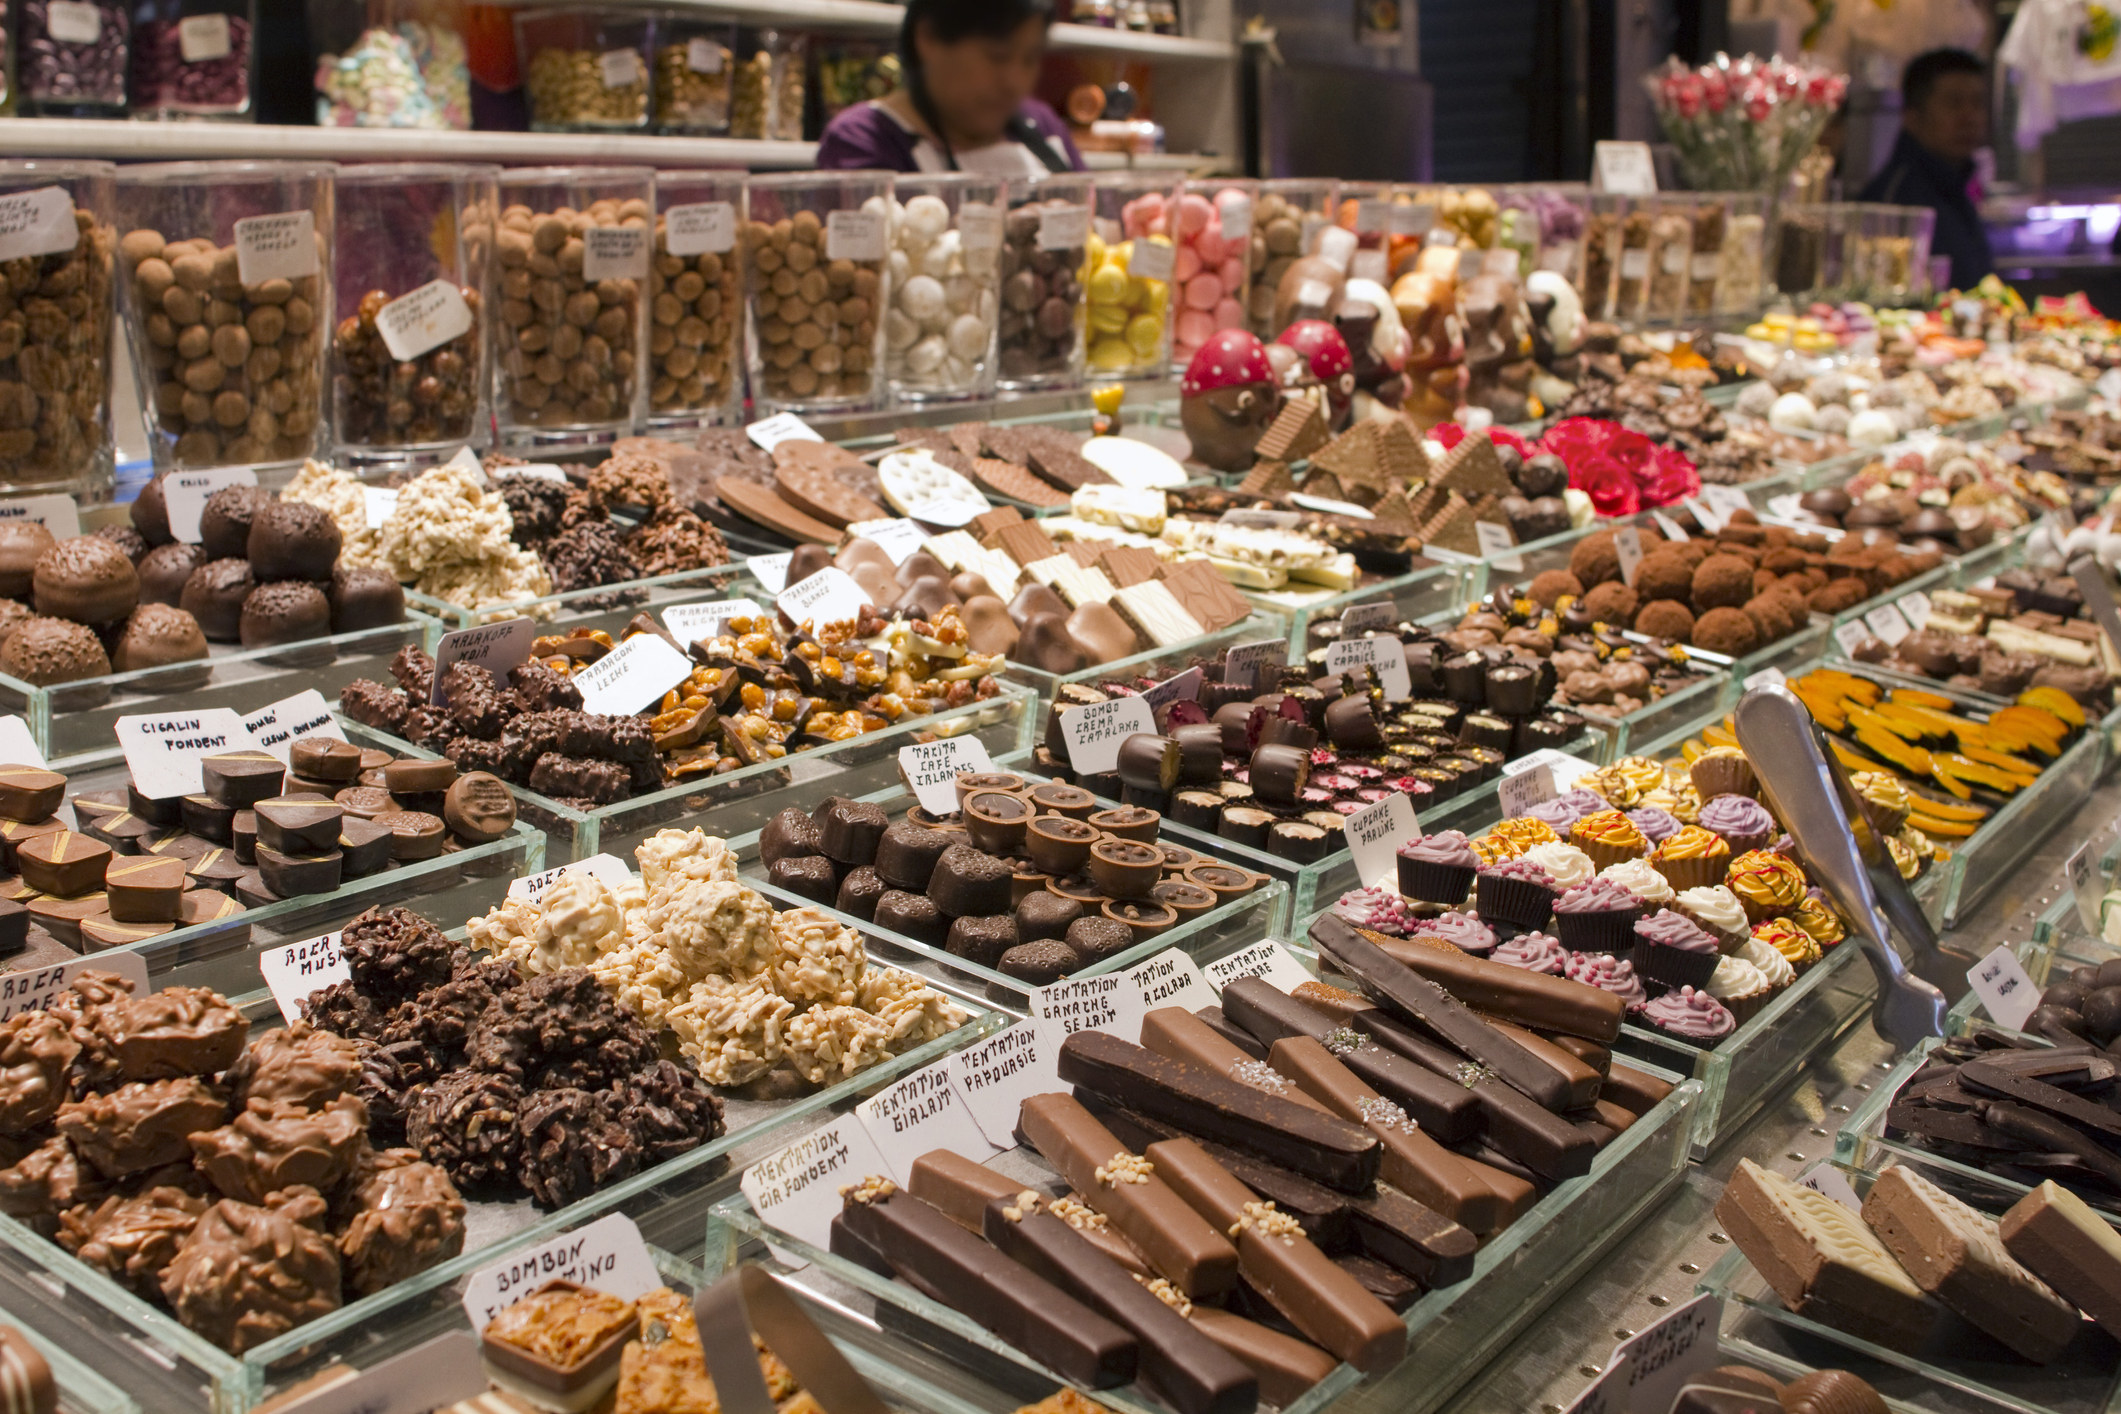 A huge display of chocolates at a candy store